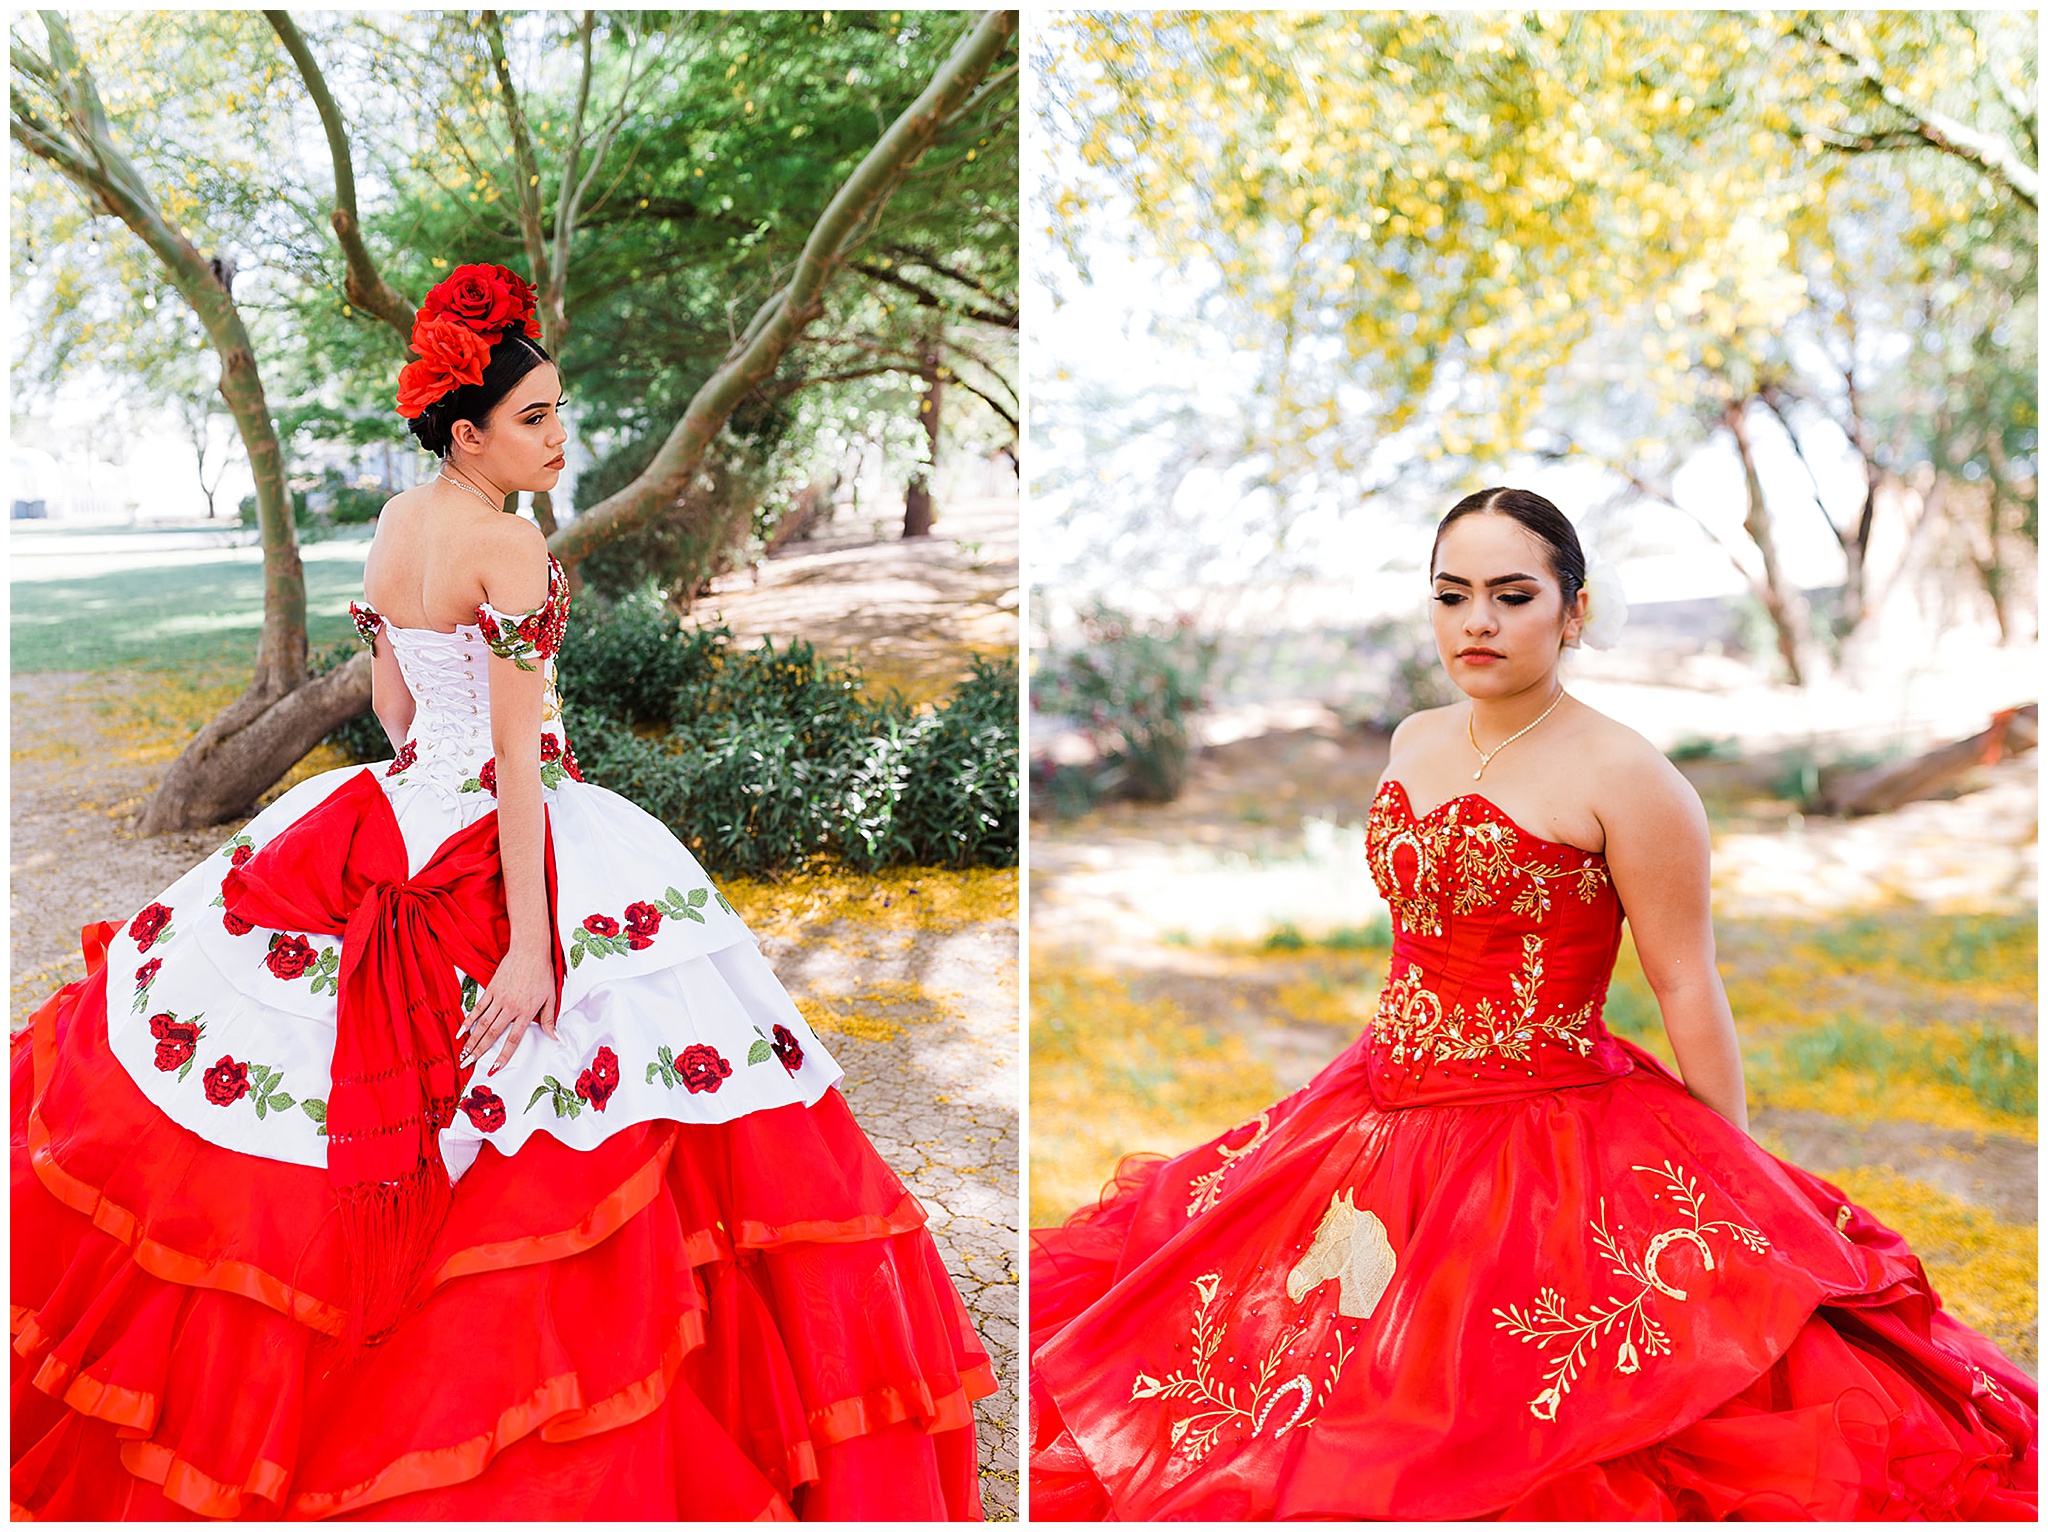 Teenager stands under some desert trees in a red andd gold embroidered ballgown Phoenix Quinceaneras dresses